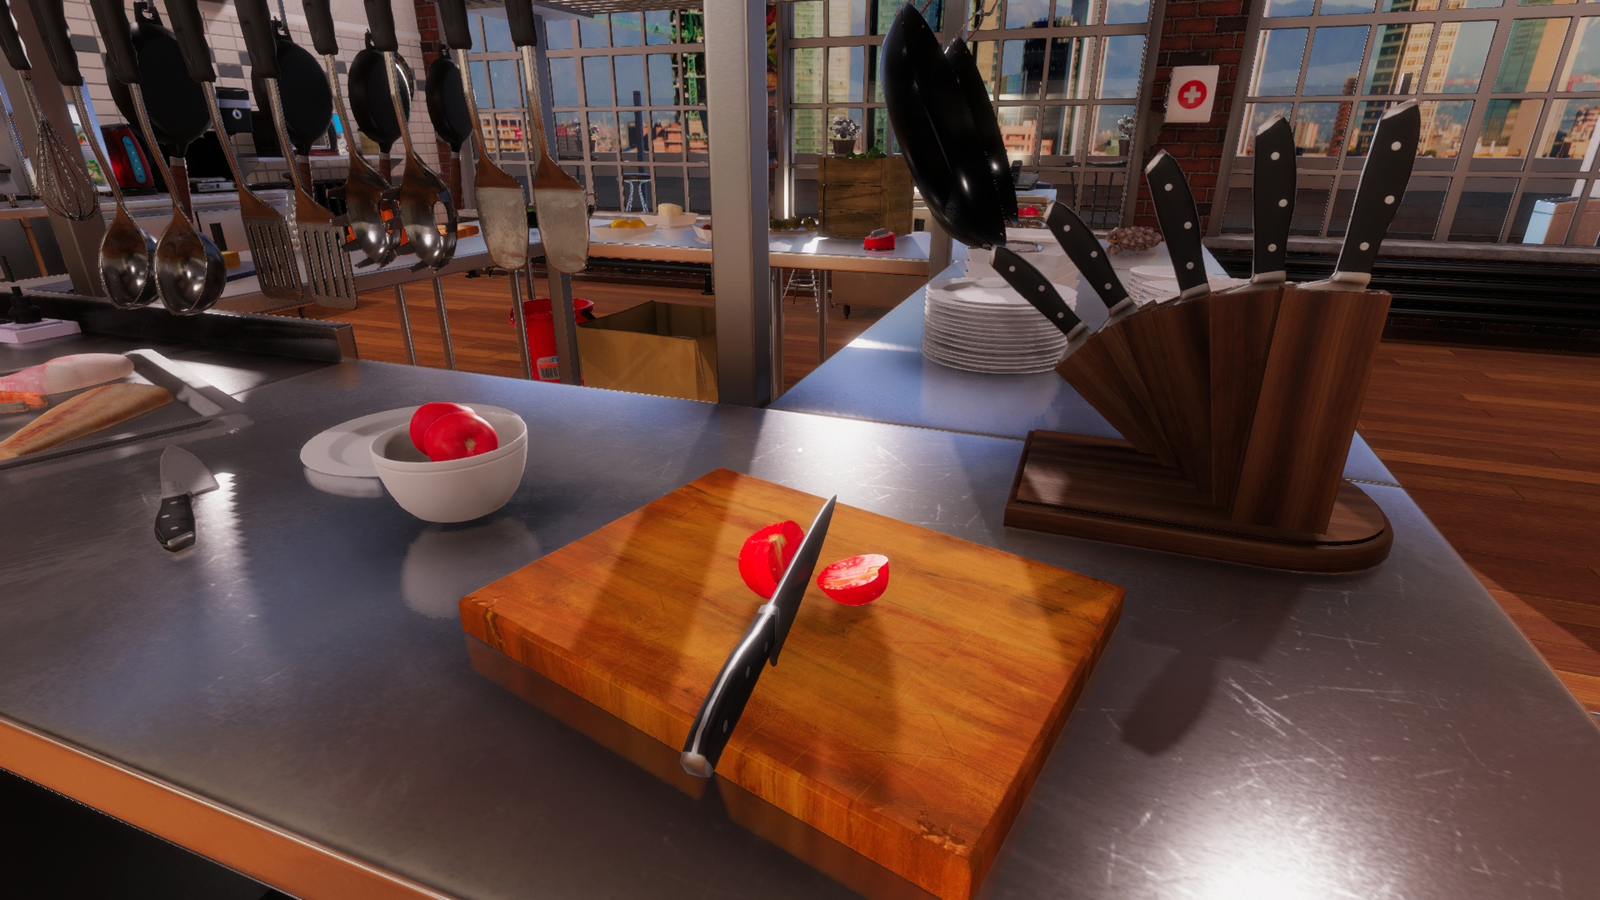 Xbox Game Pass Paid $600,000 for Cooking Simulator — Report - GameRevolution